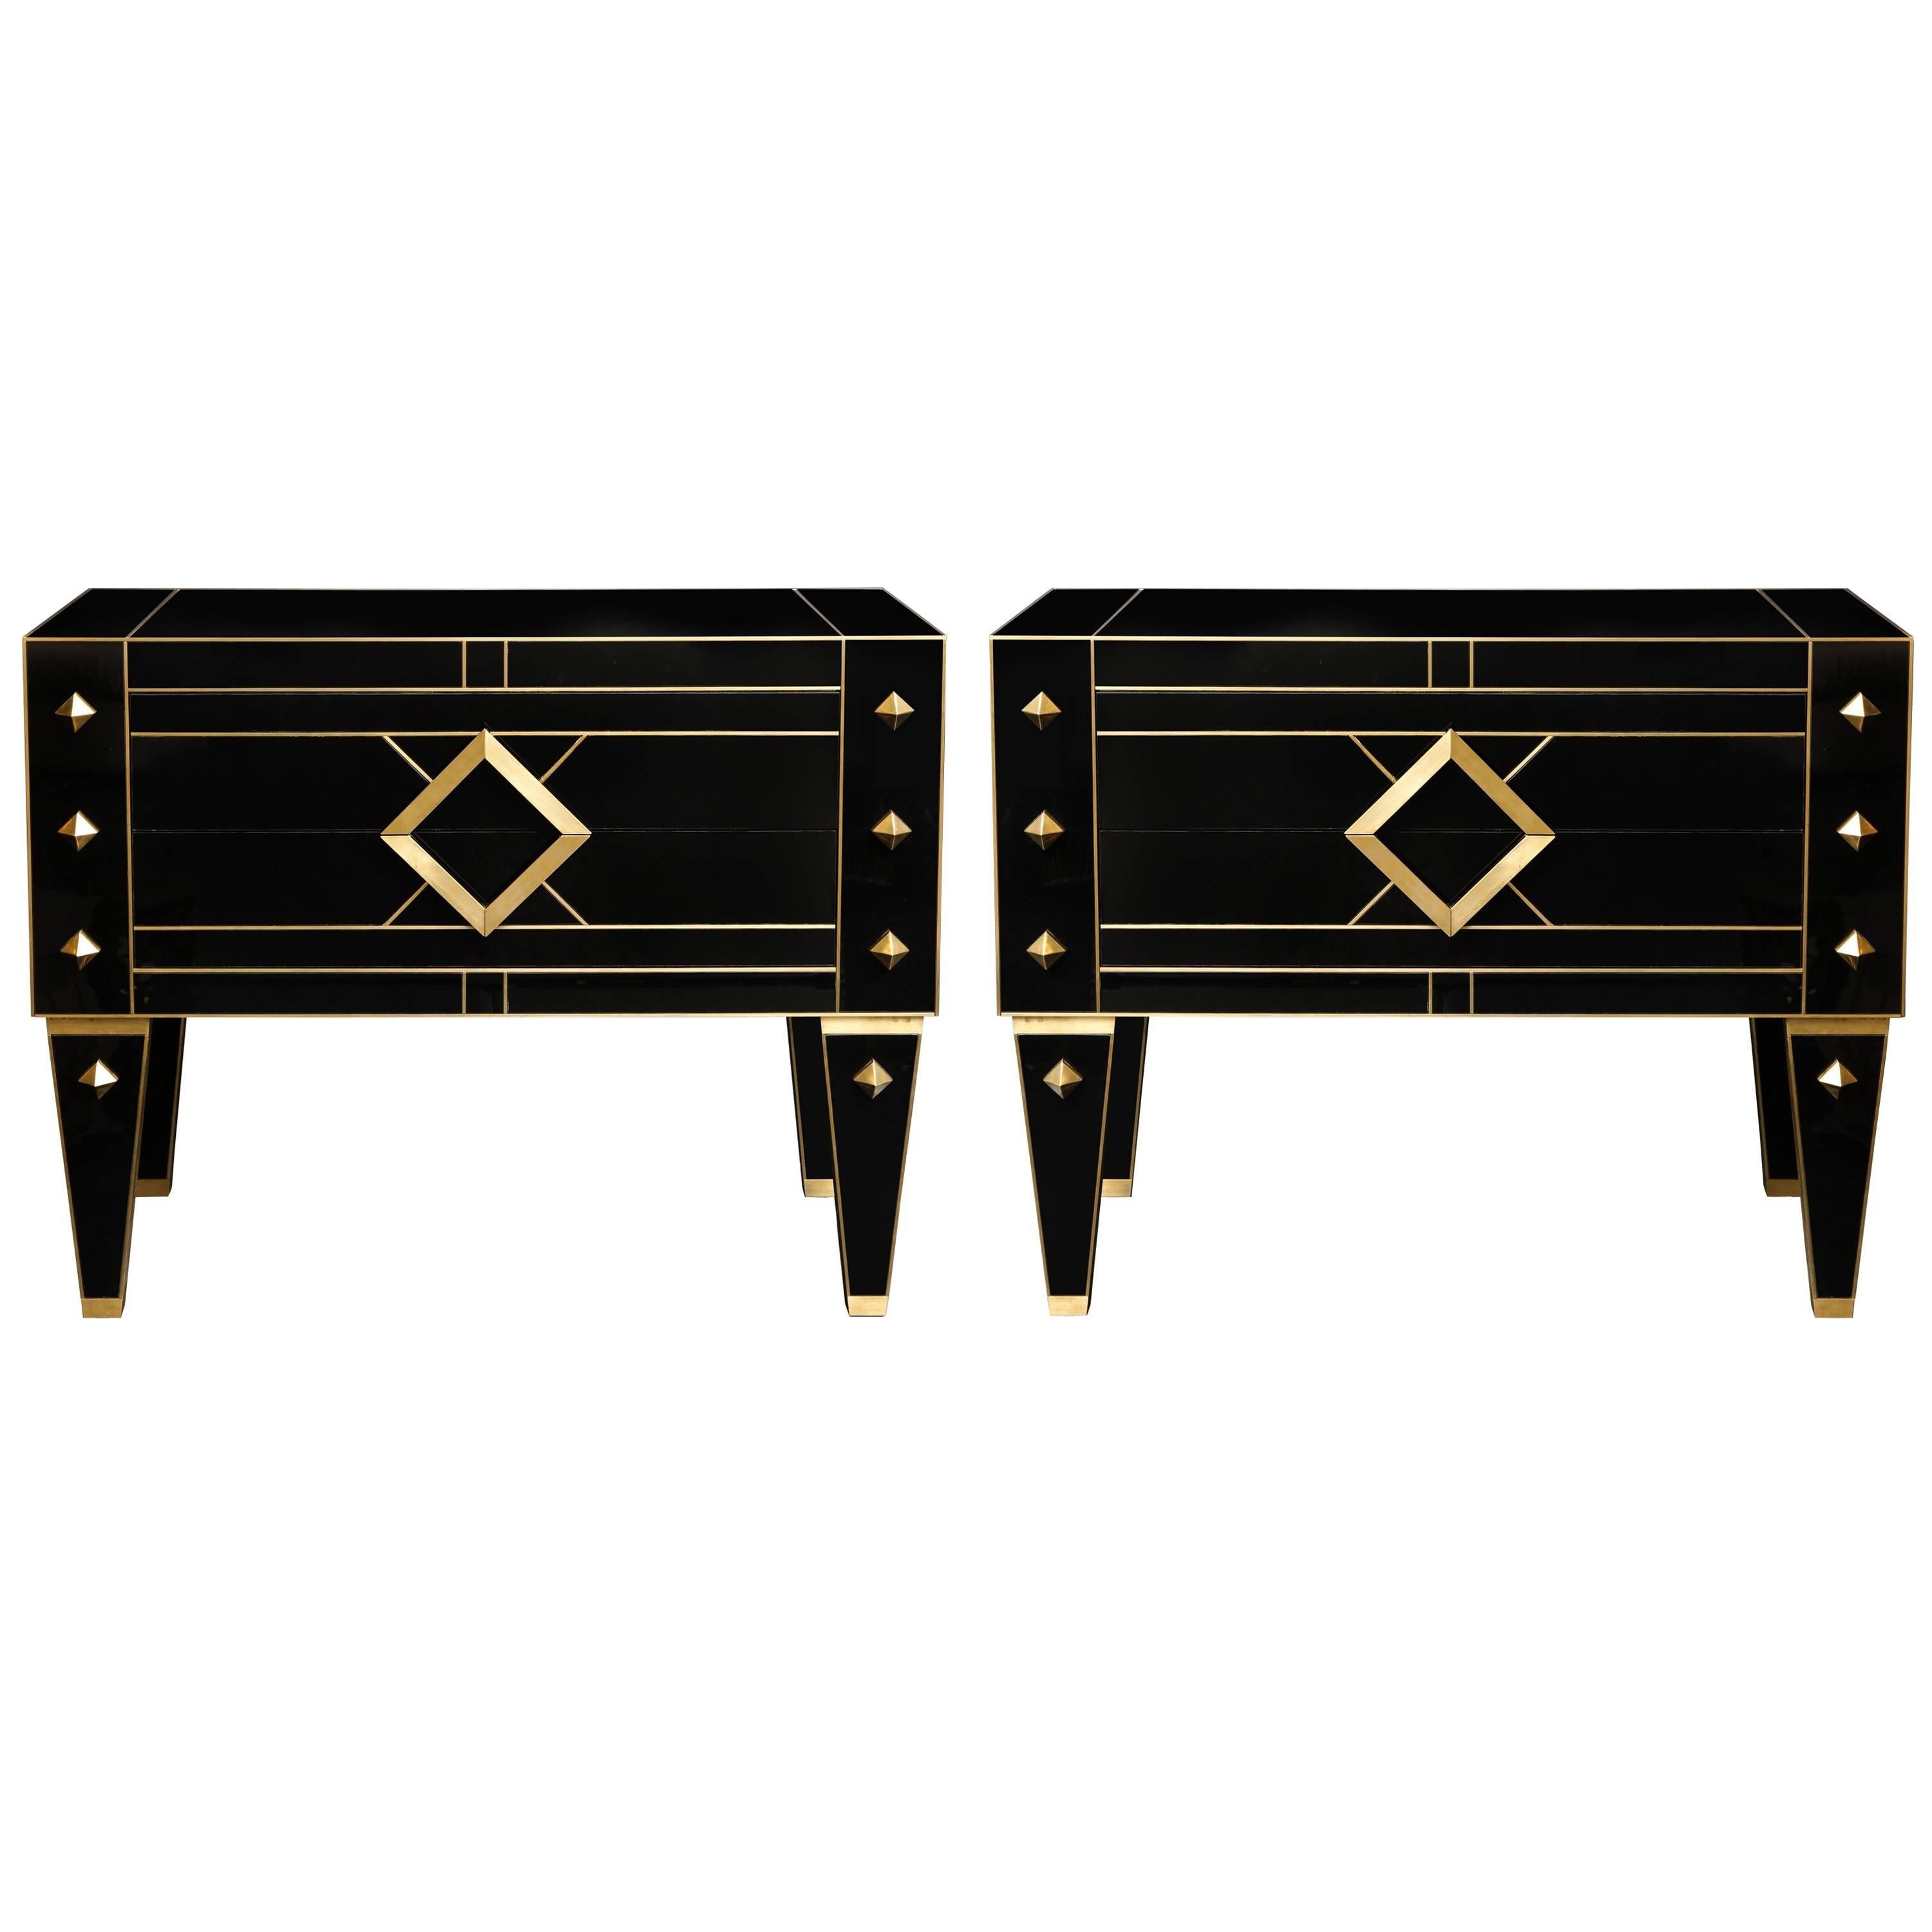 One of a Kind Signed Pair of Black Glass and Brass Chests of Drawers/Nightstands